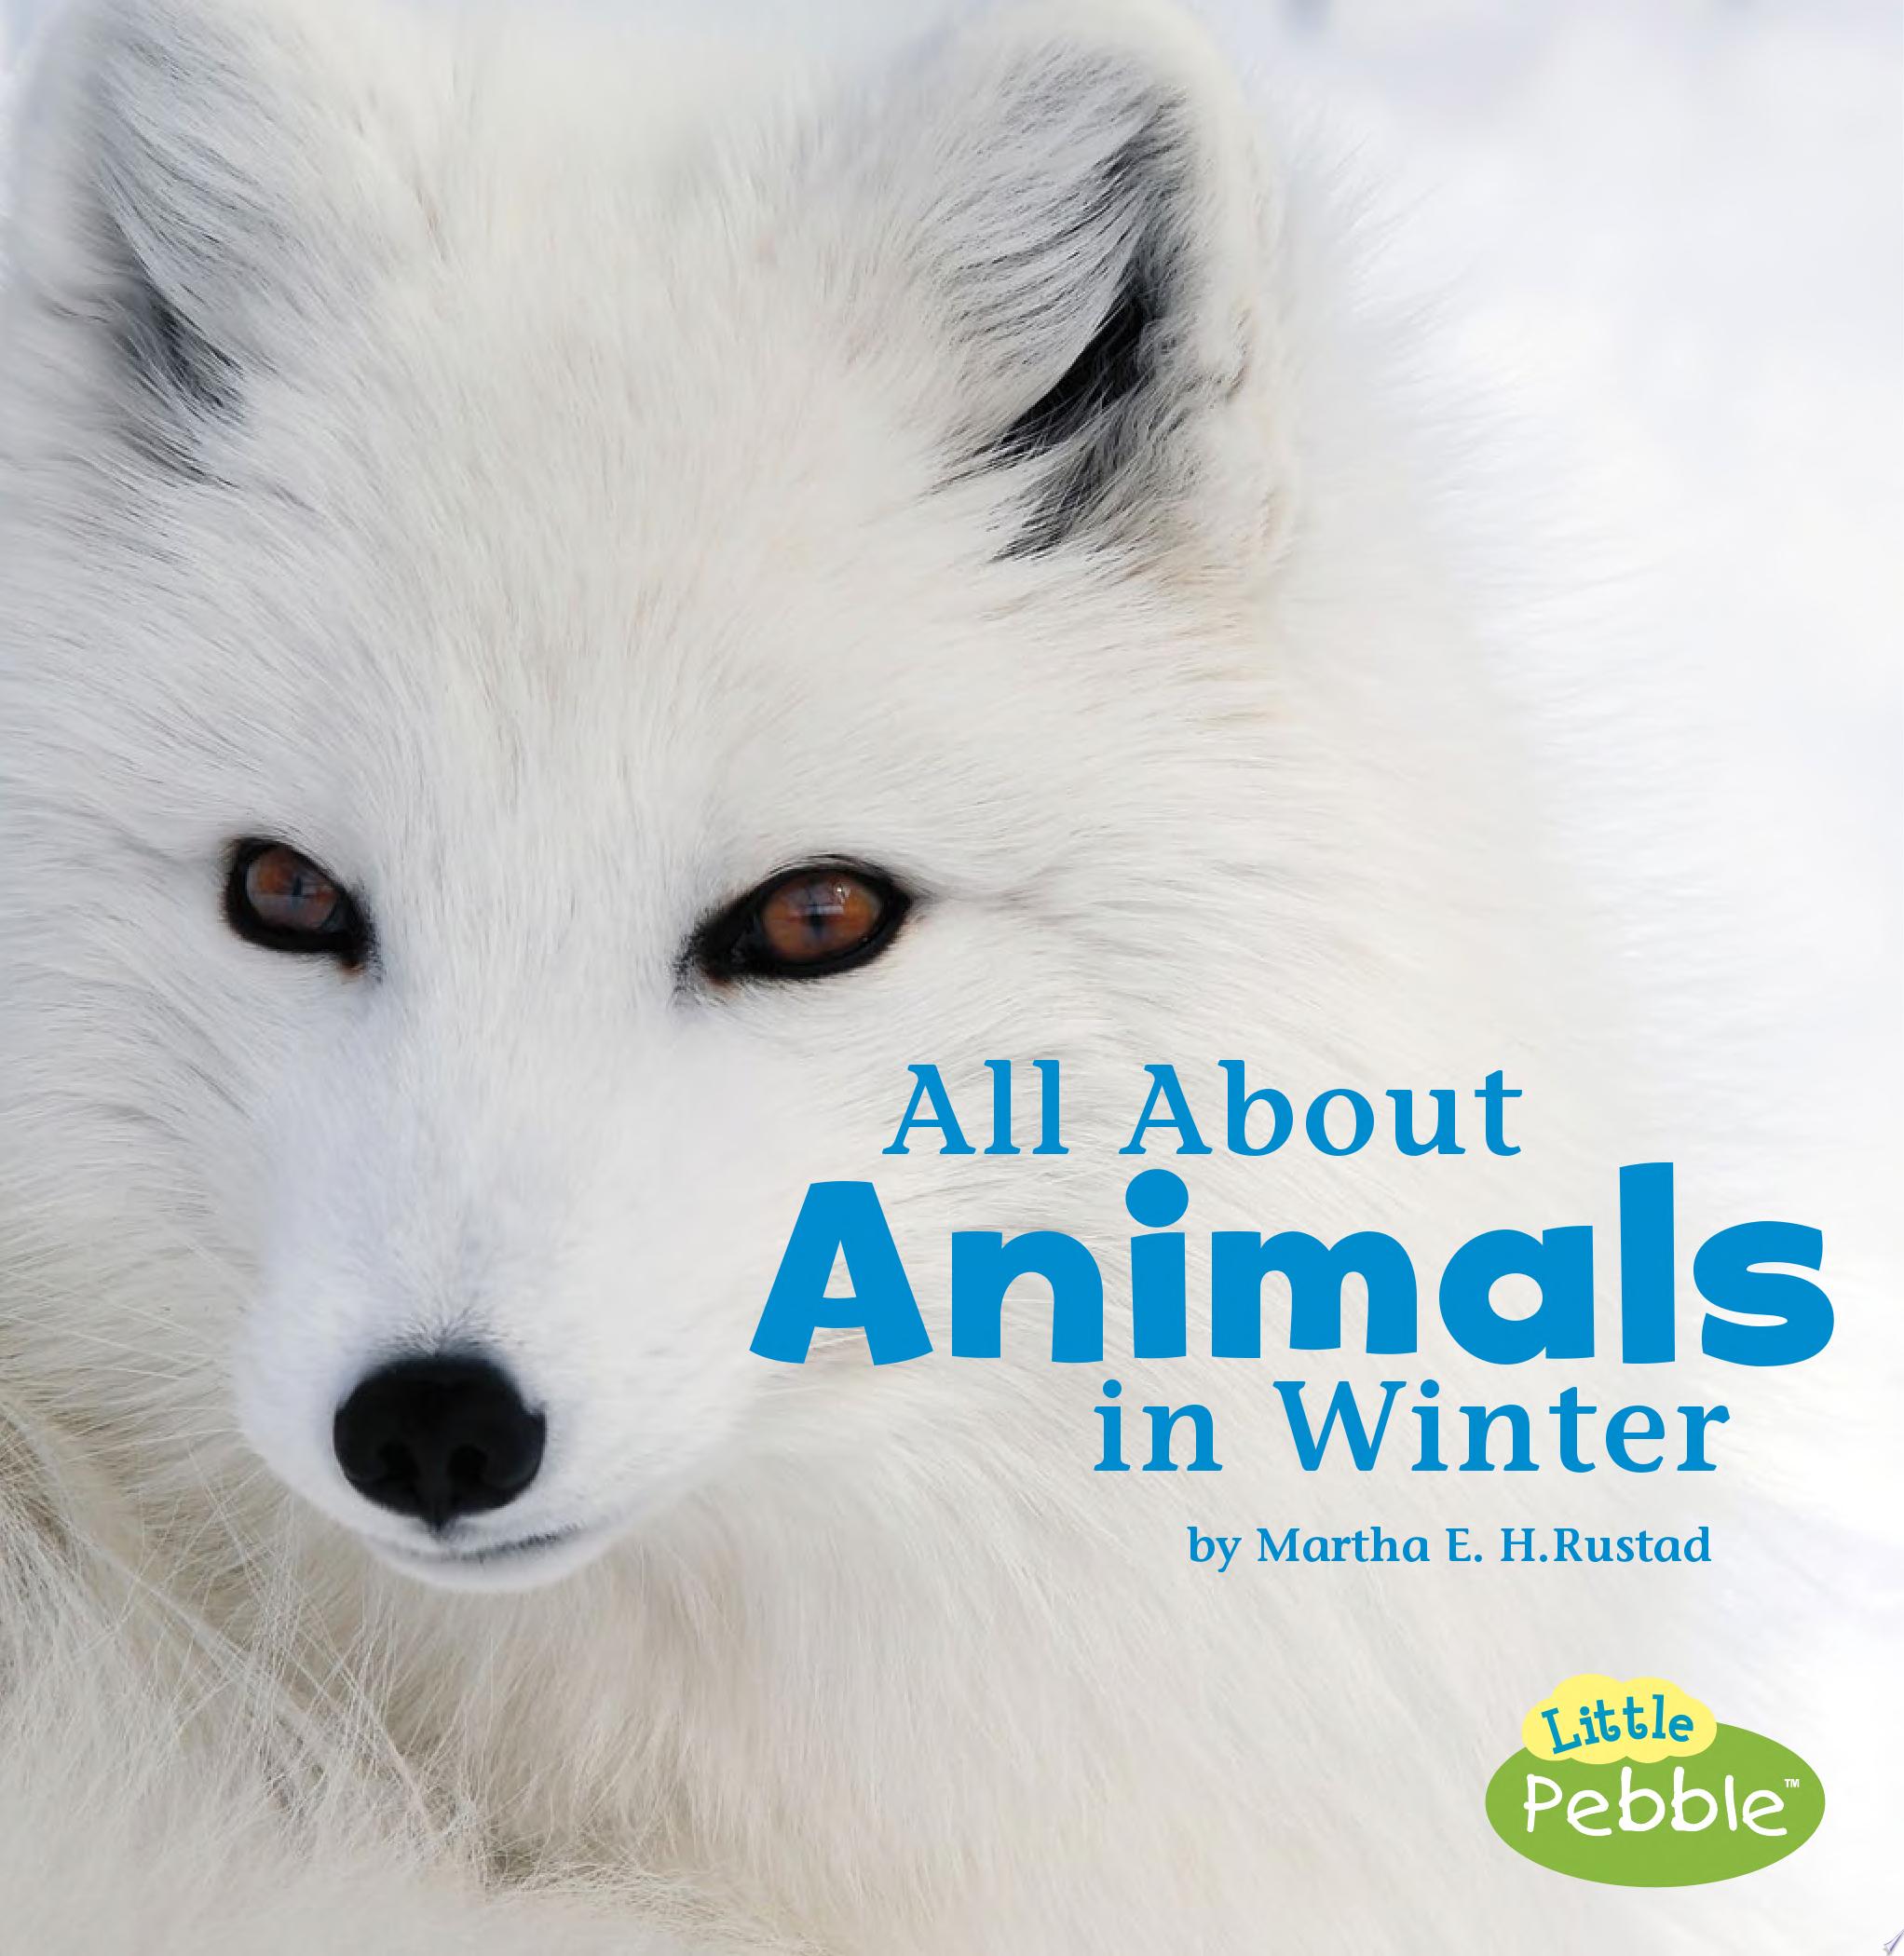 Image for "All about Animals in Winter"